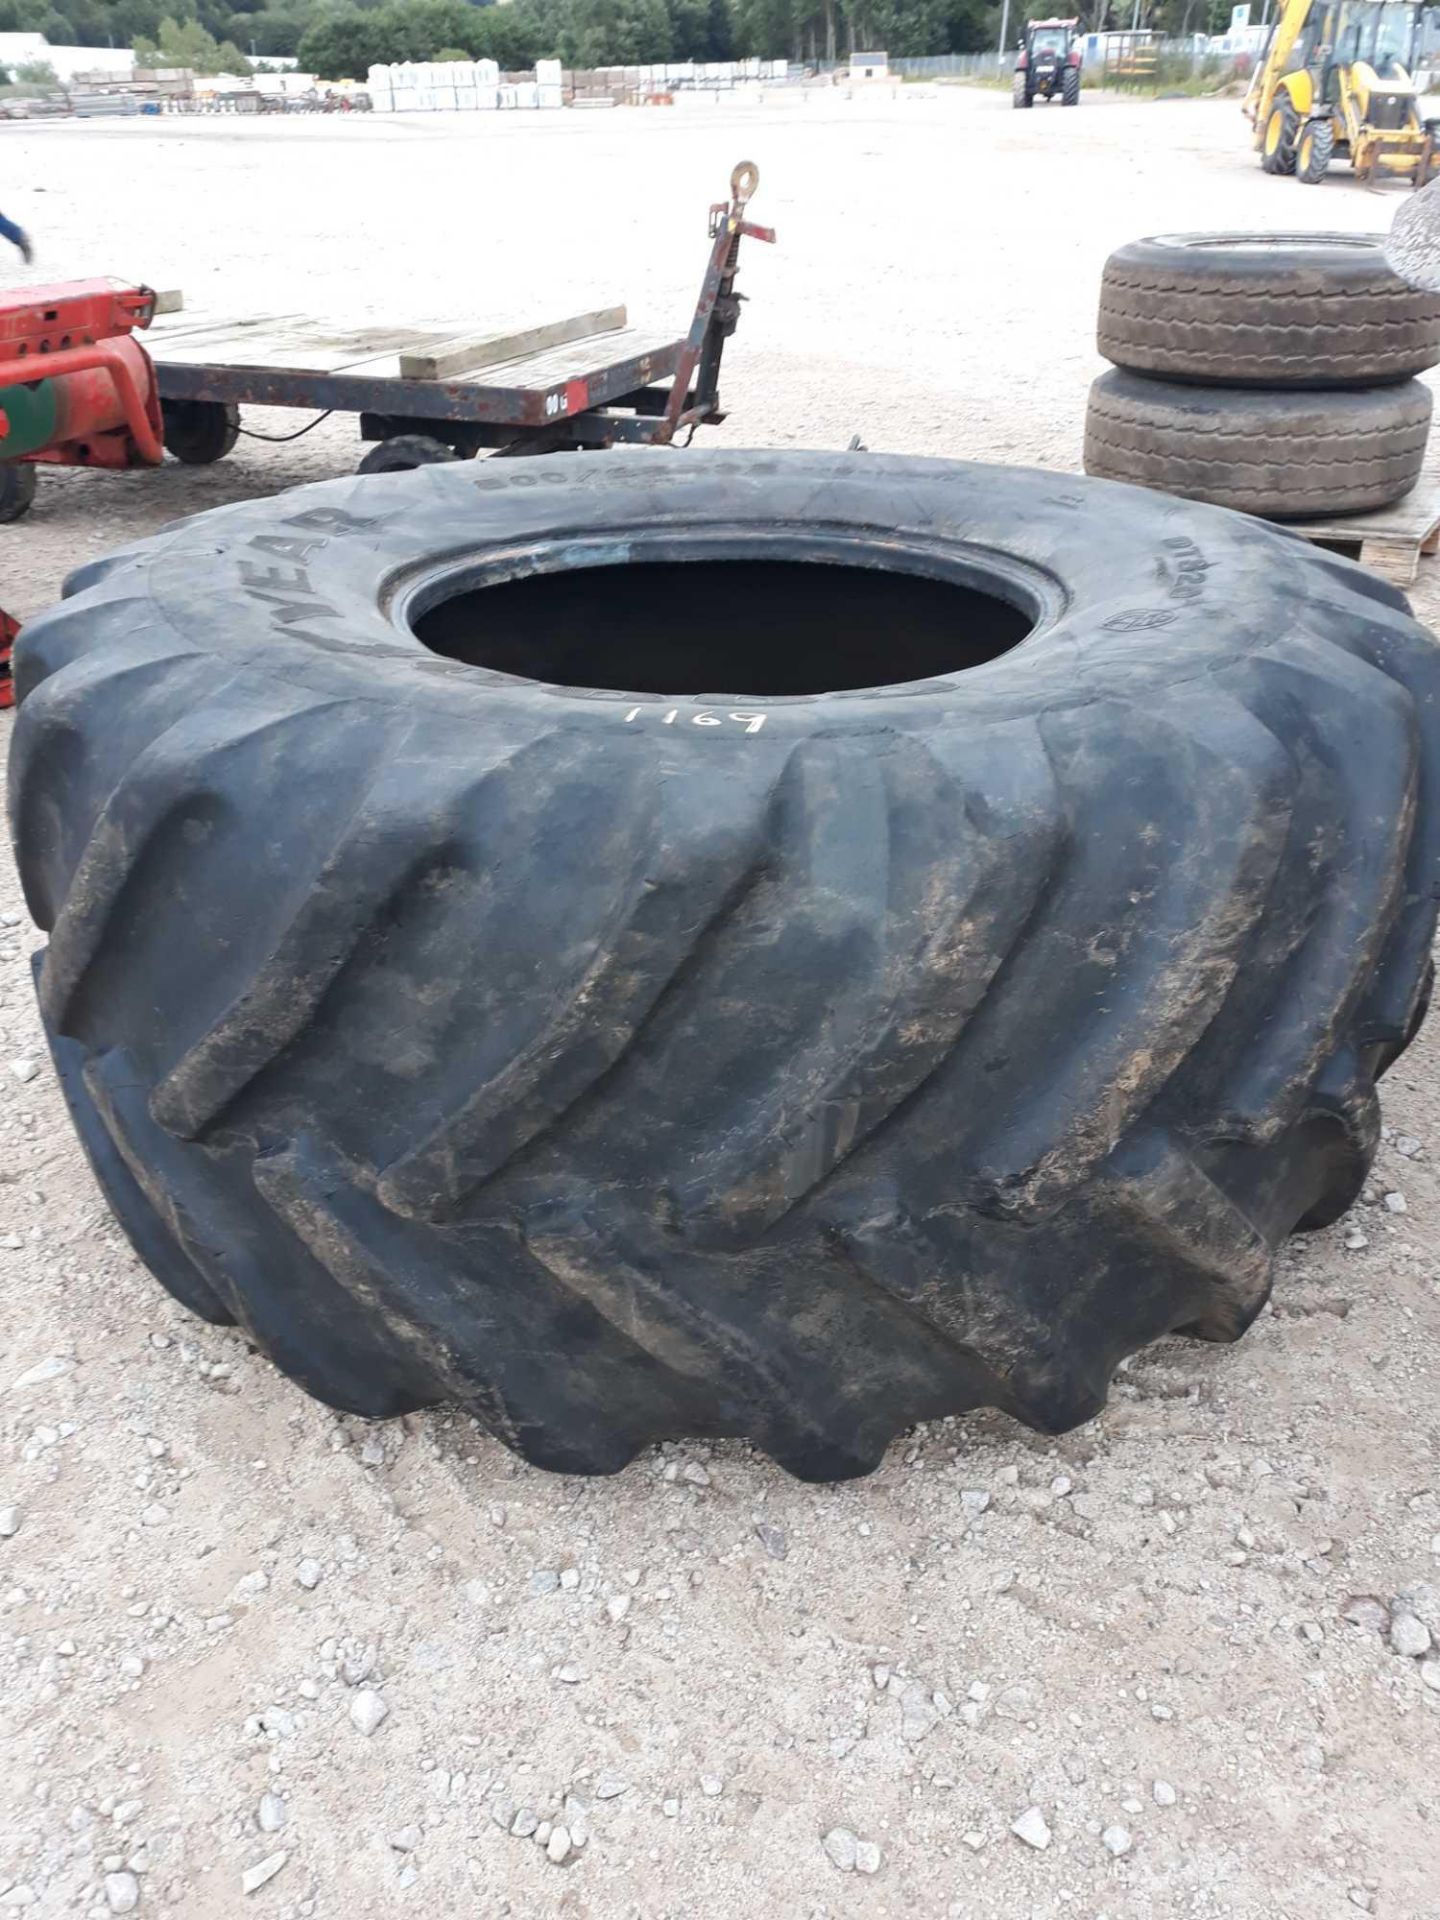 GOODYEAR 800 X 65 X 32 TYRE - Image 2 of 2